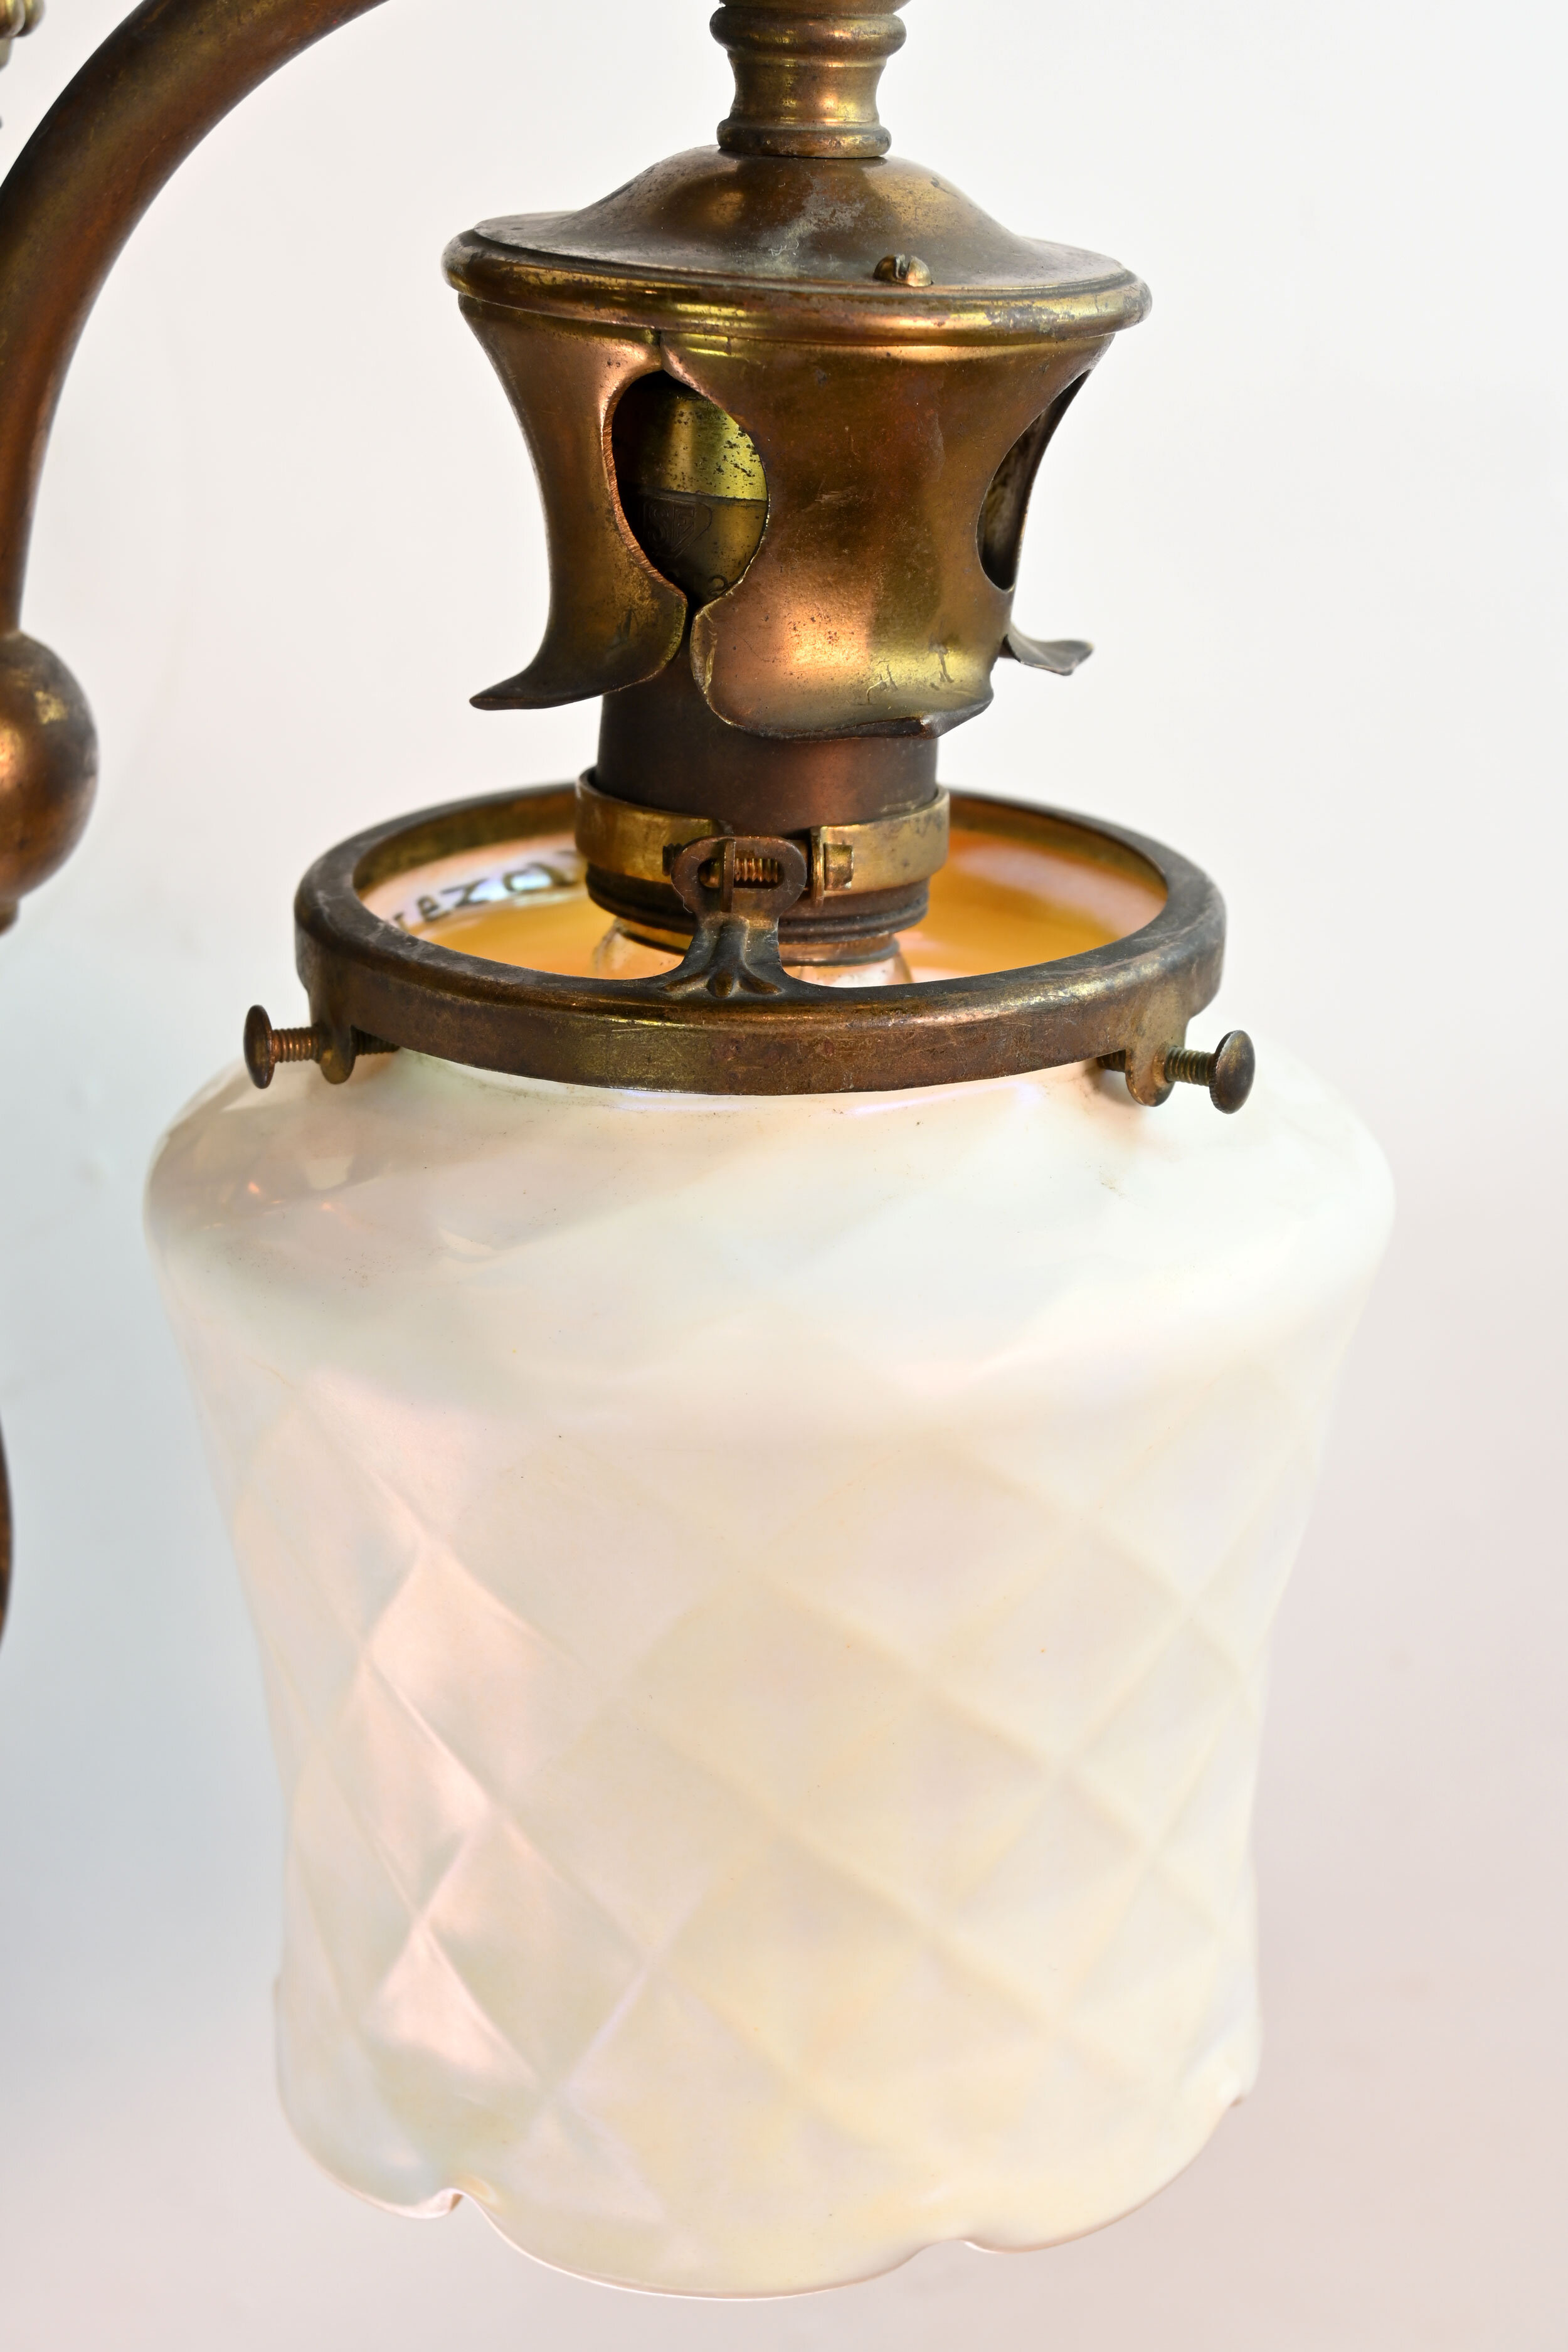 49813-gas-elec-torchiere-sconce-w-3-in-quezal-shades-8.jpg